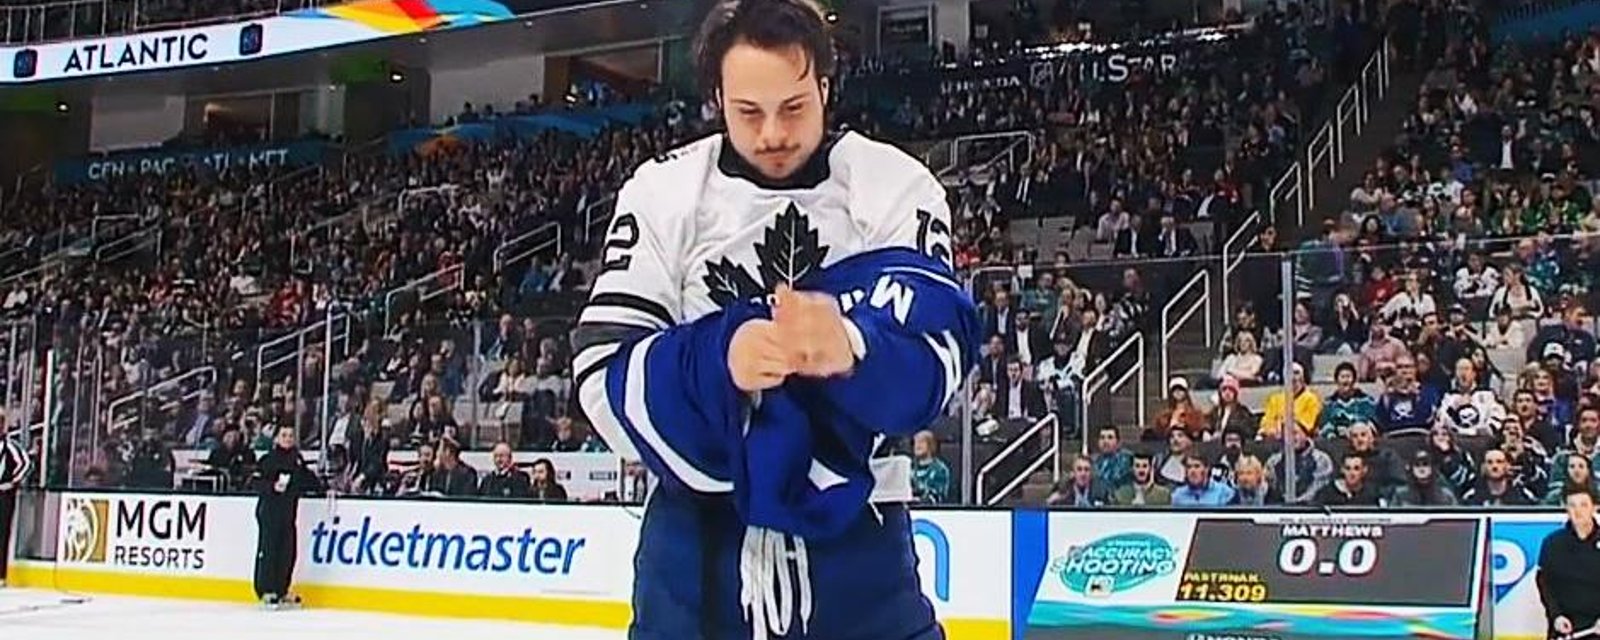 Matthews will auction off Marleau tribute jersey for charity 